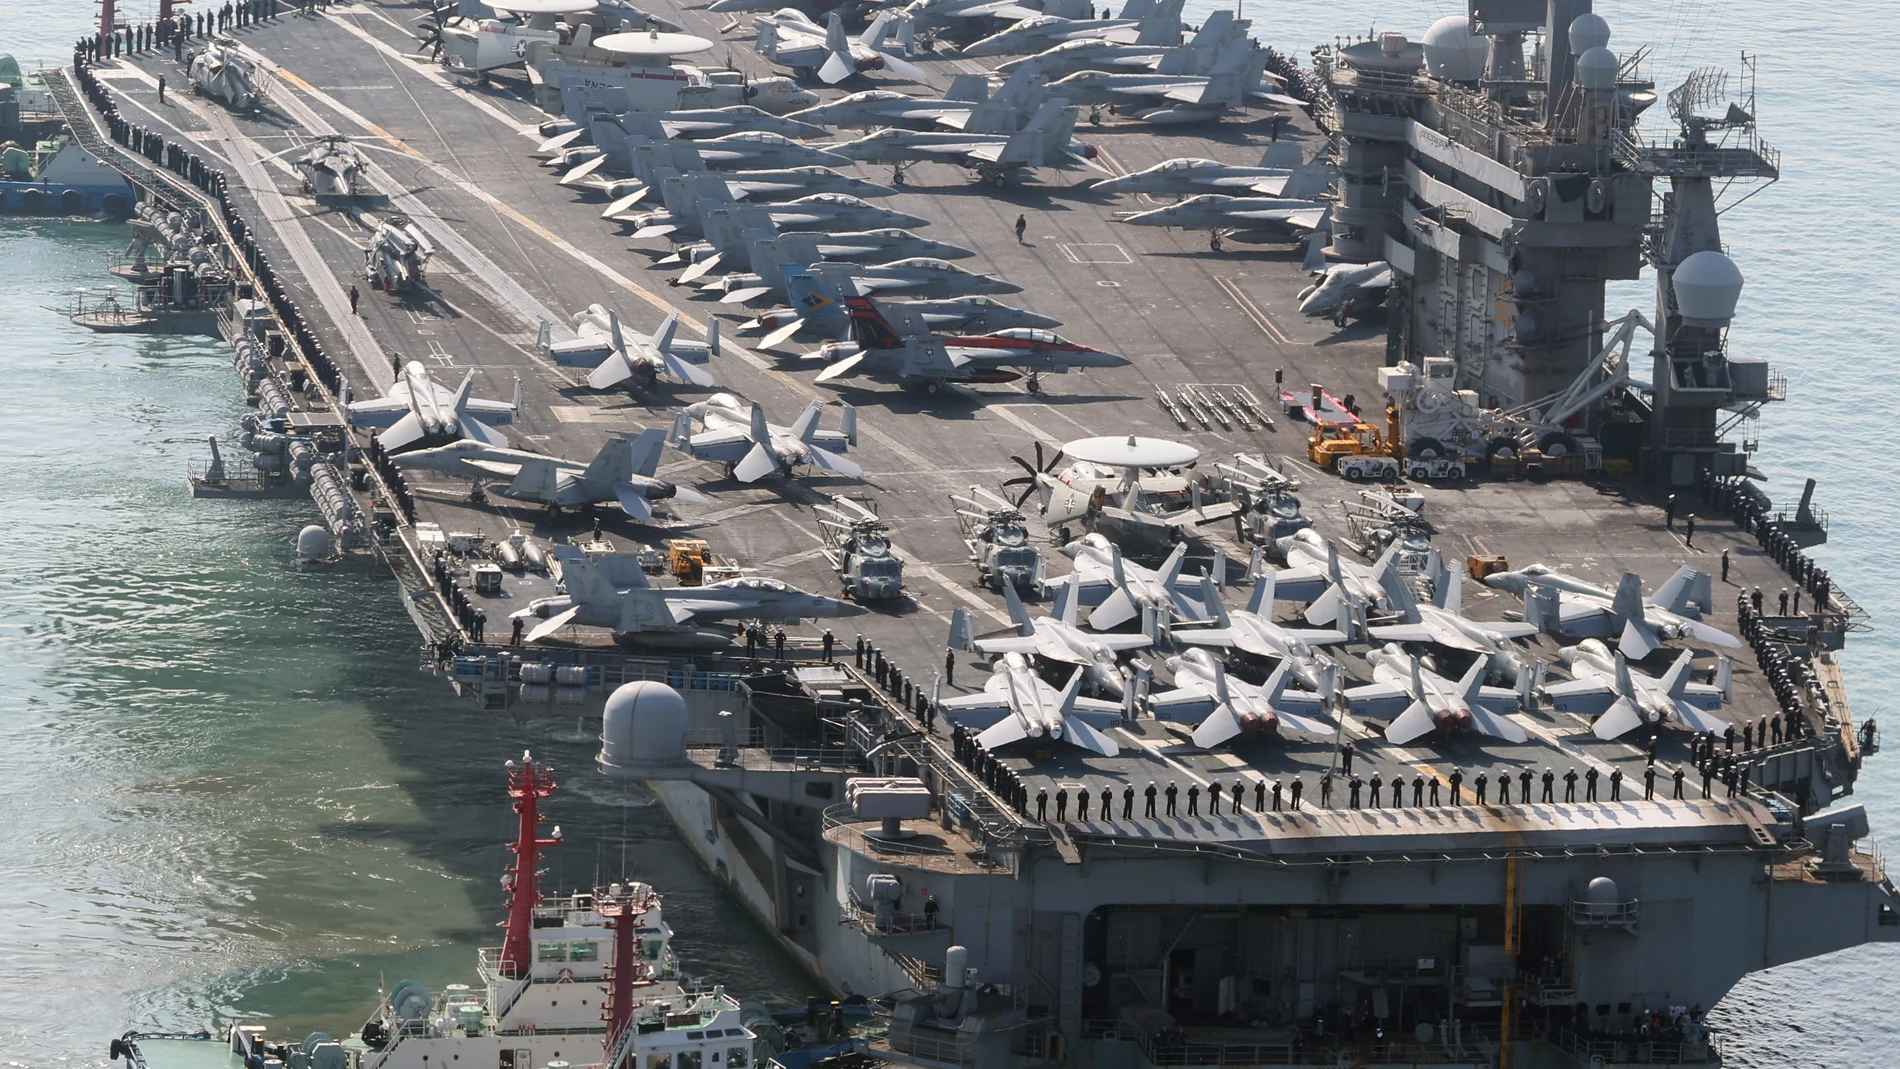 Busan (Korea, Republic Of), 28/03/2023.- The US Navy nuclear-powered aircraft carrier USS Nimitz makes a call at a naval base in the port city of Busan, South Korea, 28 March 2023. The call comes amid heightened tensions caused by recent North Korean missile tests. (Corea del Sur, Estados Unidos) EFE/EPA/YONHAP SOUTH KOREA OUT 